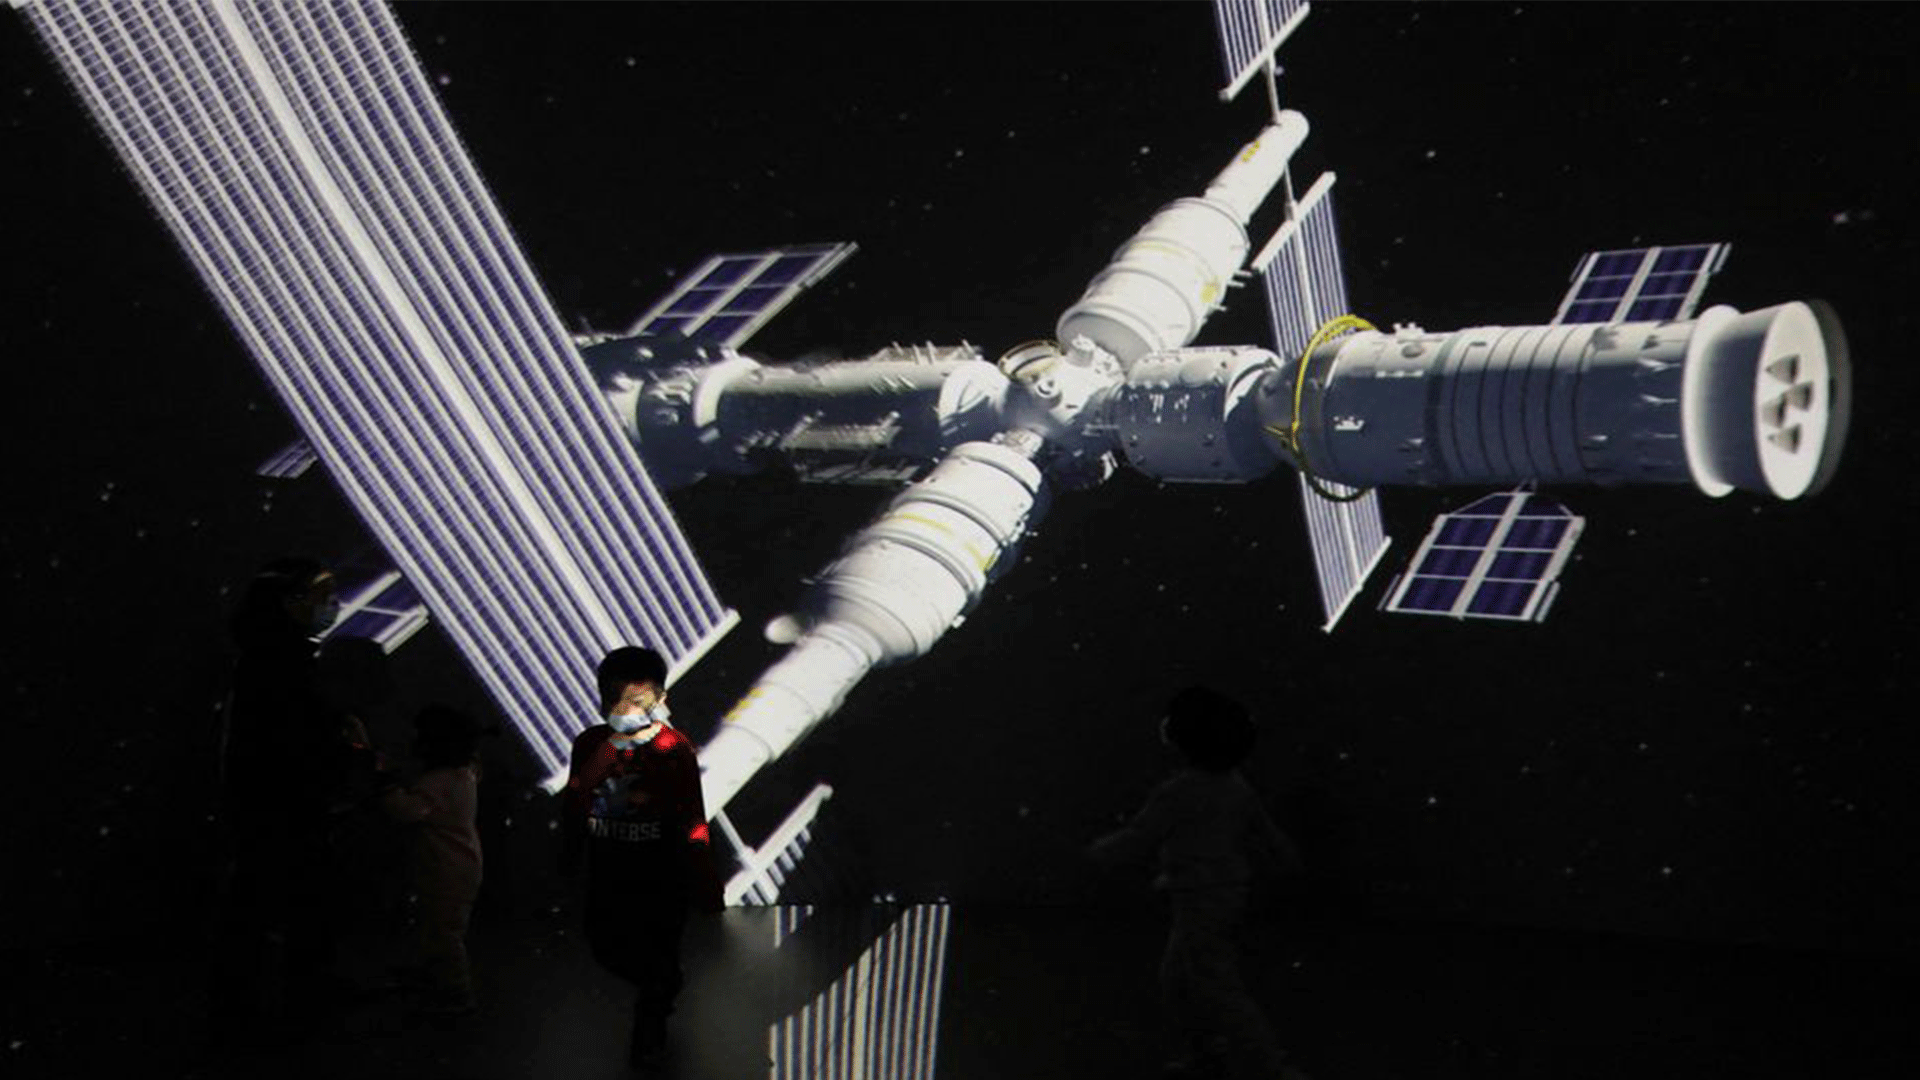  A child stands near a giant screen showing the image of the Tianhe space station on the country's Space Day at China Science and Technology Museum in Beijing, China April 24, 2021. REUTERS/Tingshu Wang/File Photo